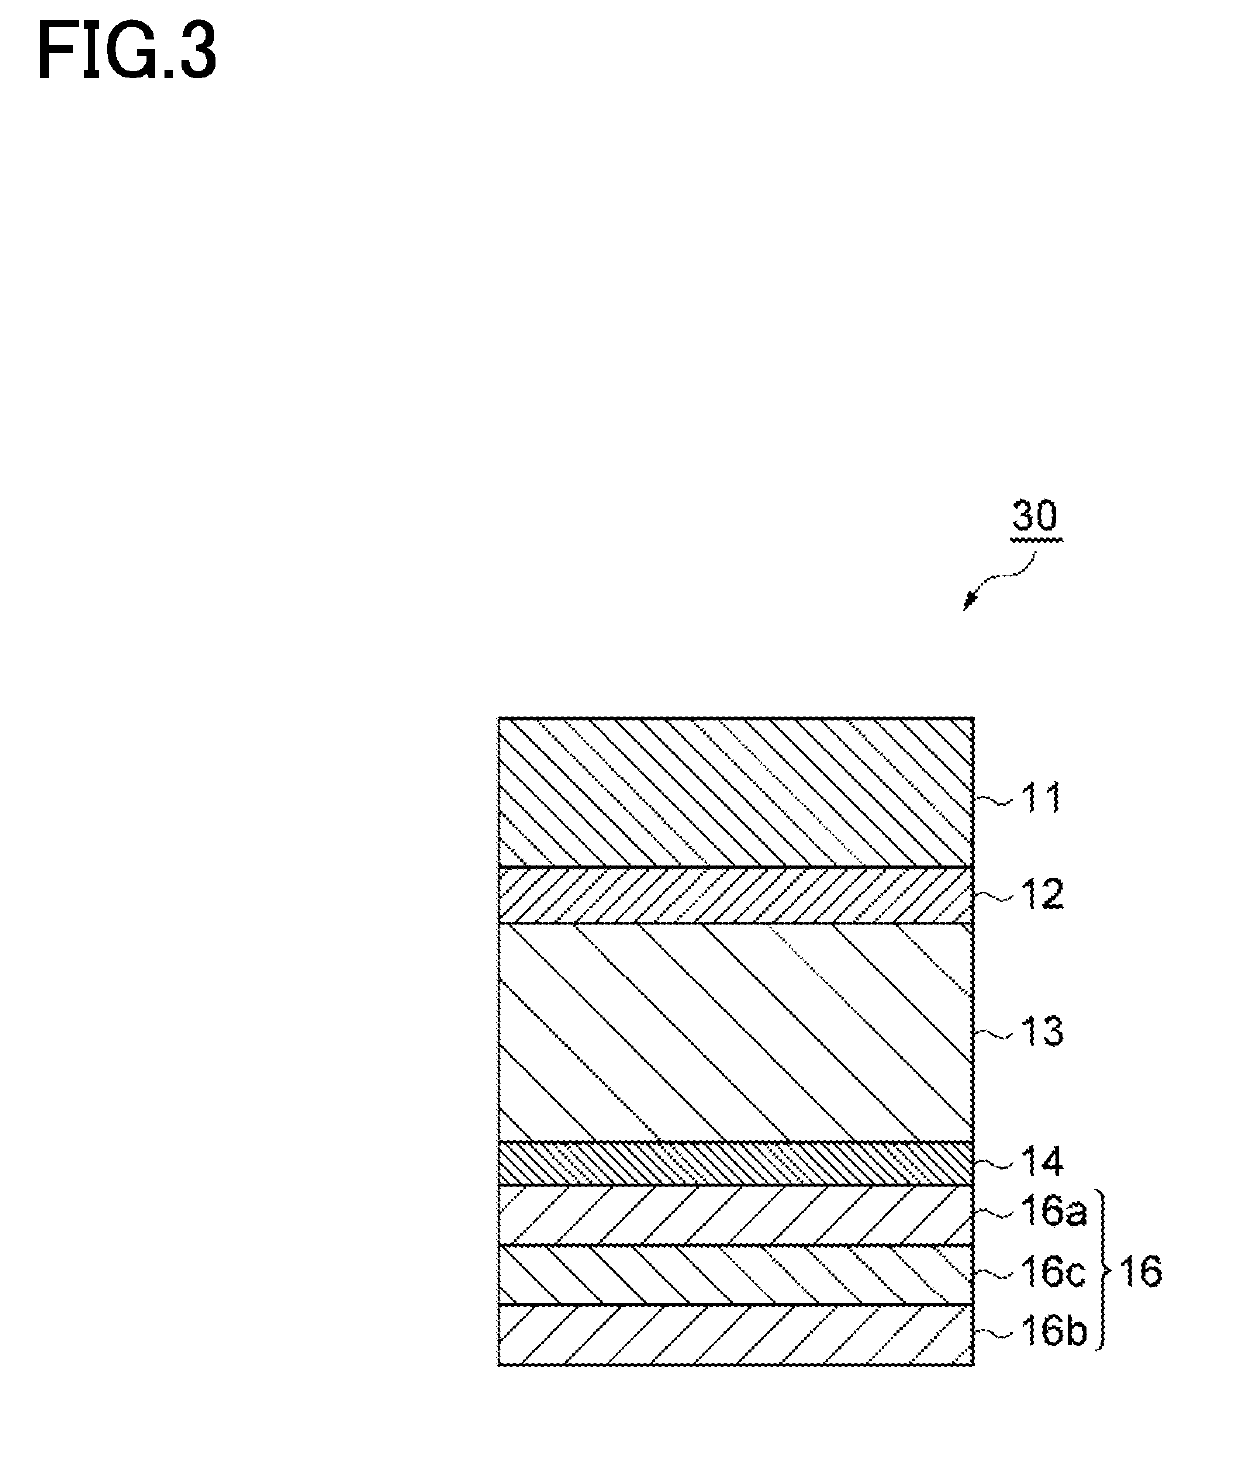 Power storage device packaging material